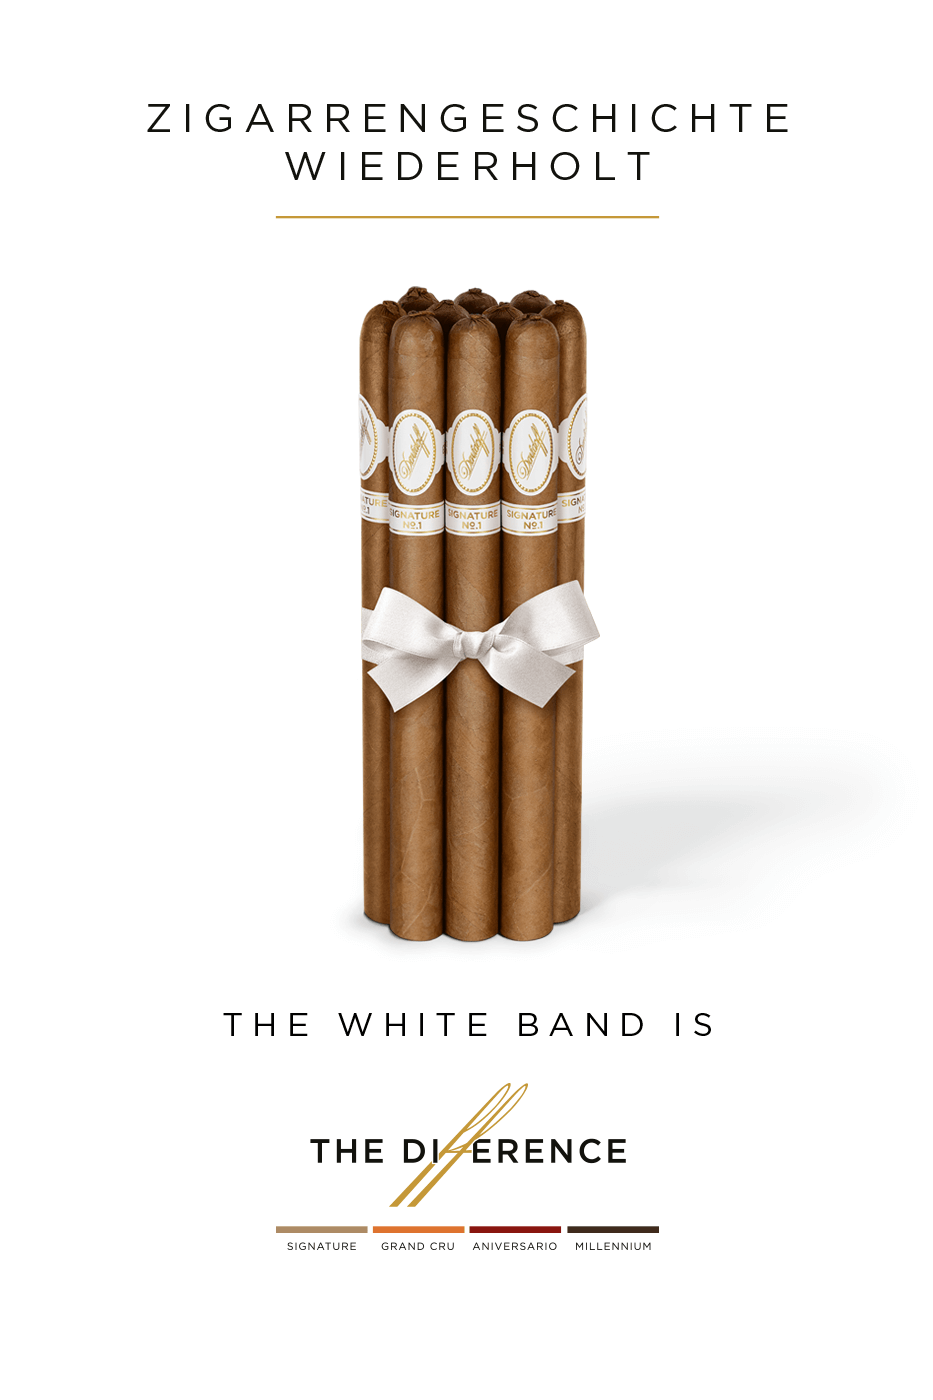 10 Davidoff Signature No. 1 Limited Edition Collection cigars bundled up with a bow, standing there like a rocket ready to take off.